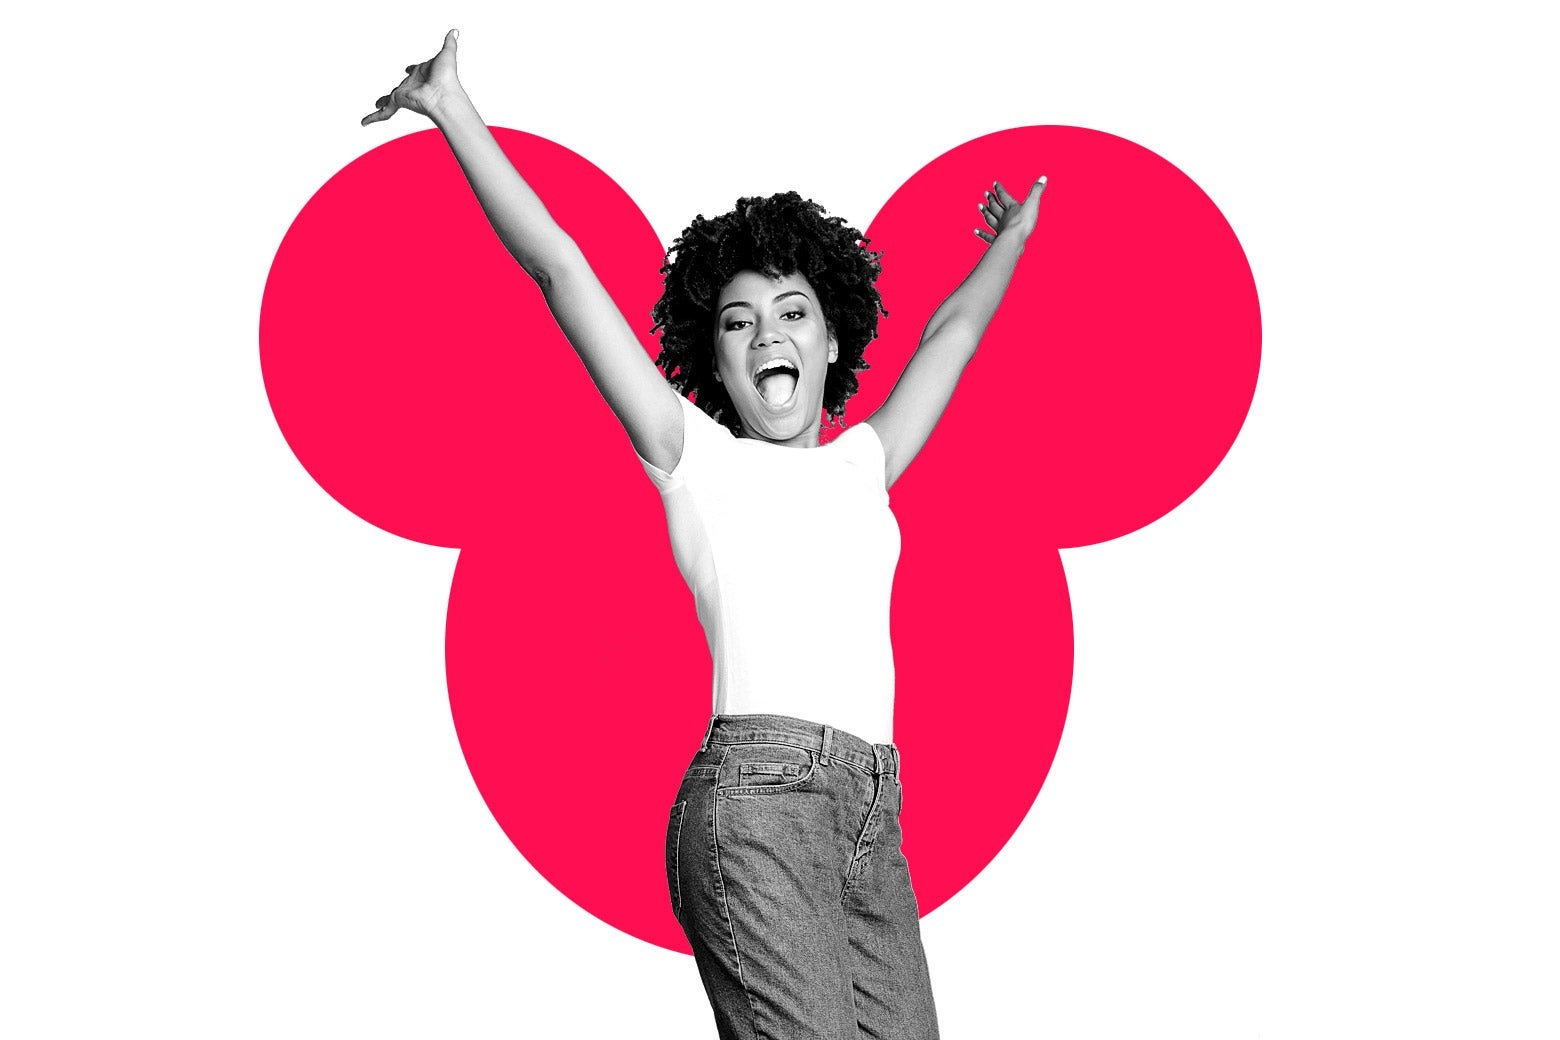 A woman jumps for joy in front of the Mickey Mouse symbol